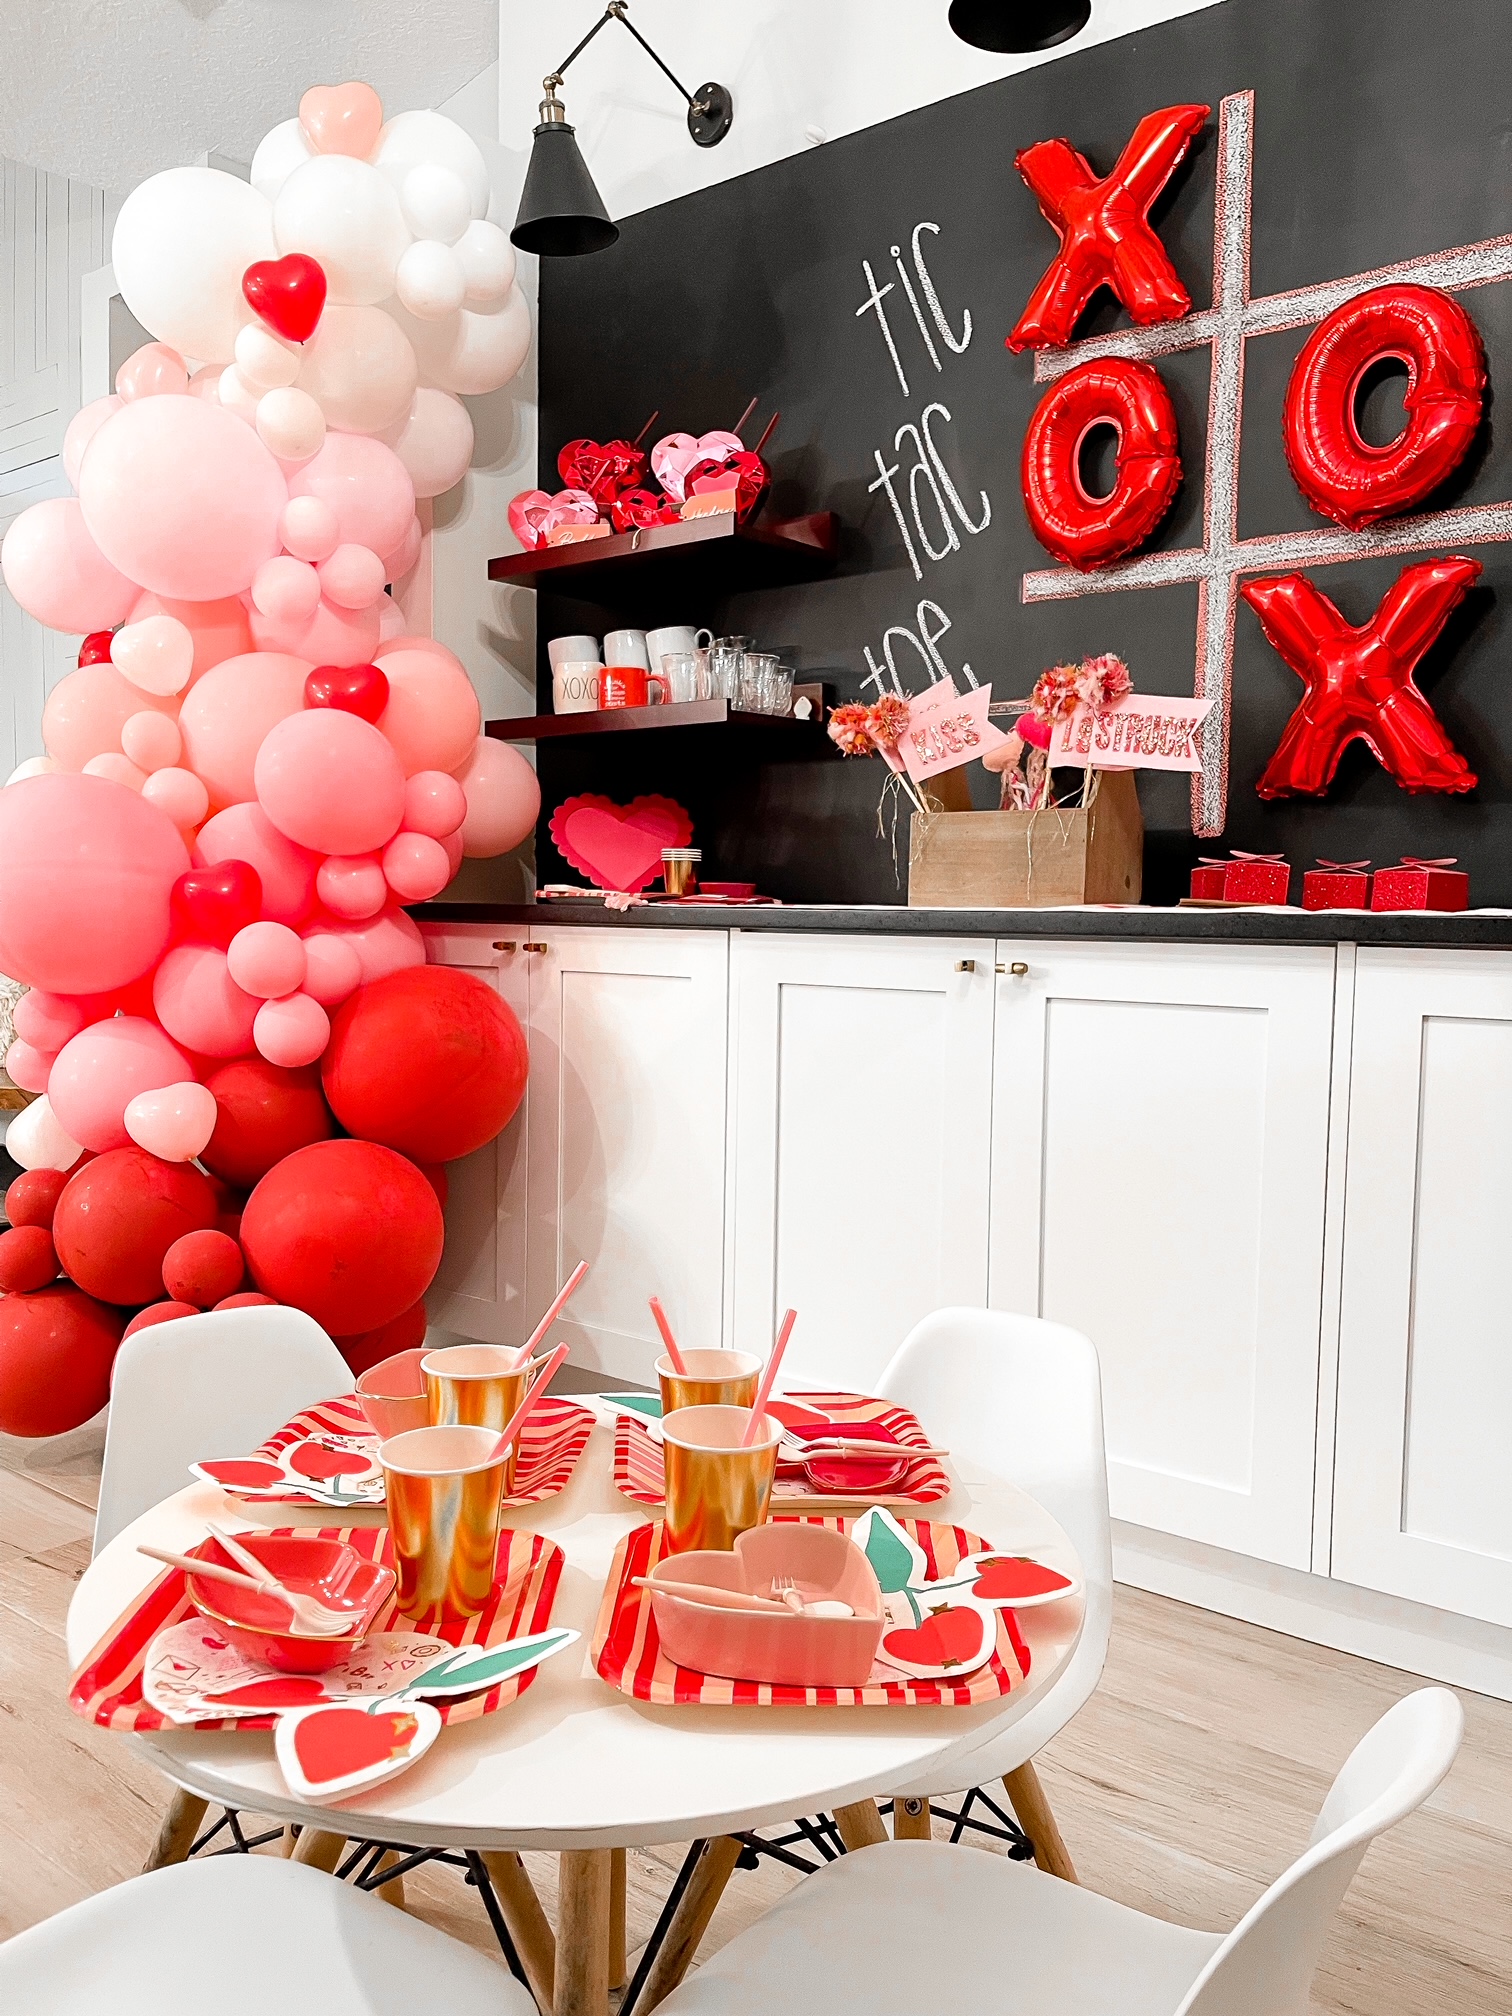 Tic Tac Toe, I Love You So! Valentine’s Party